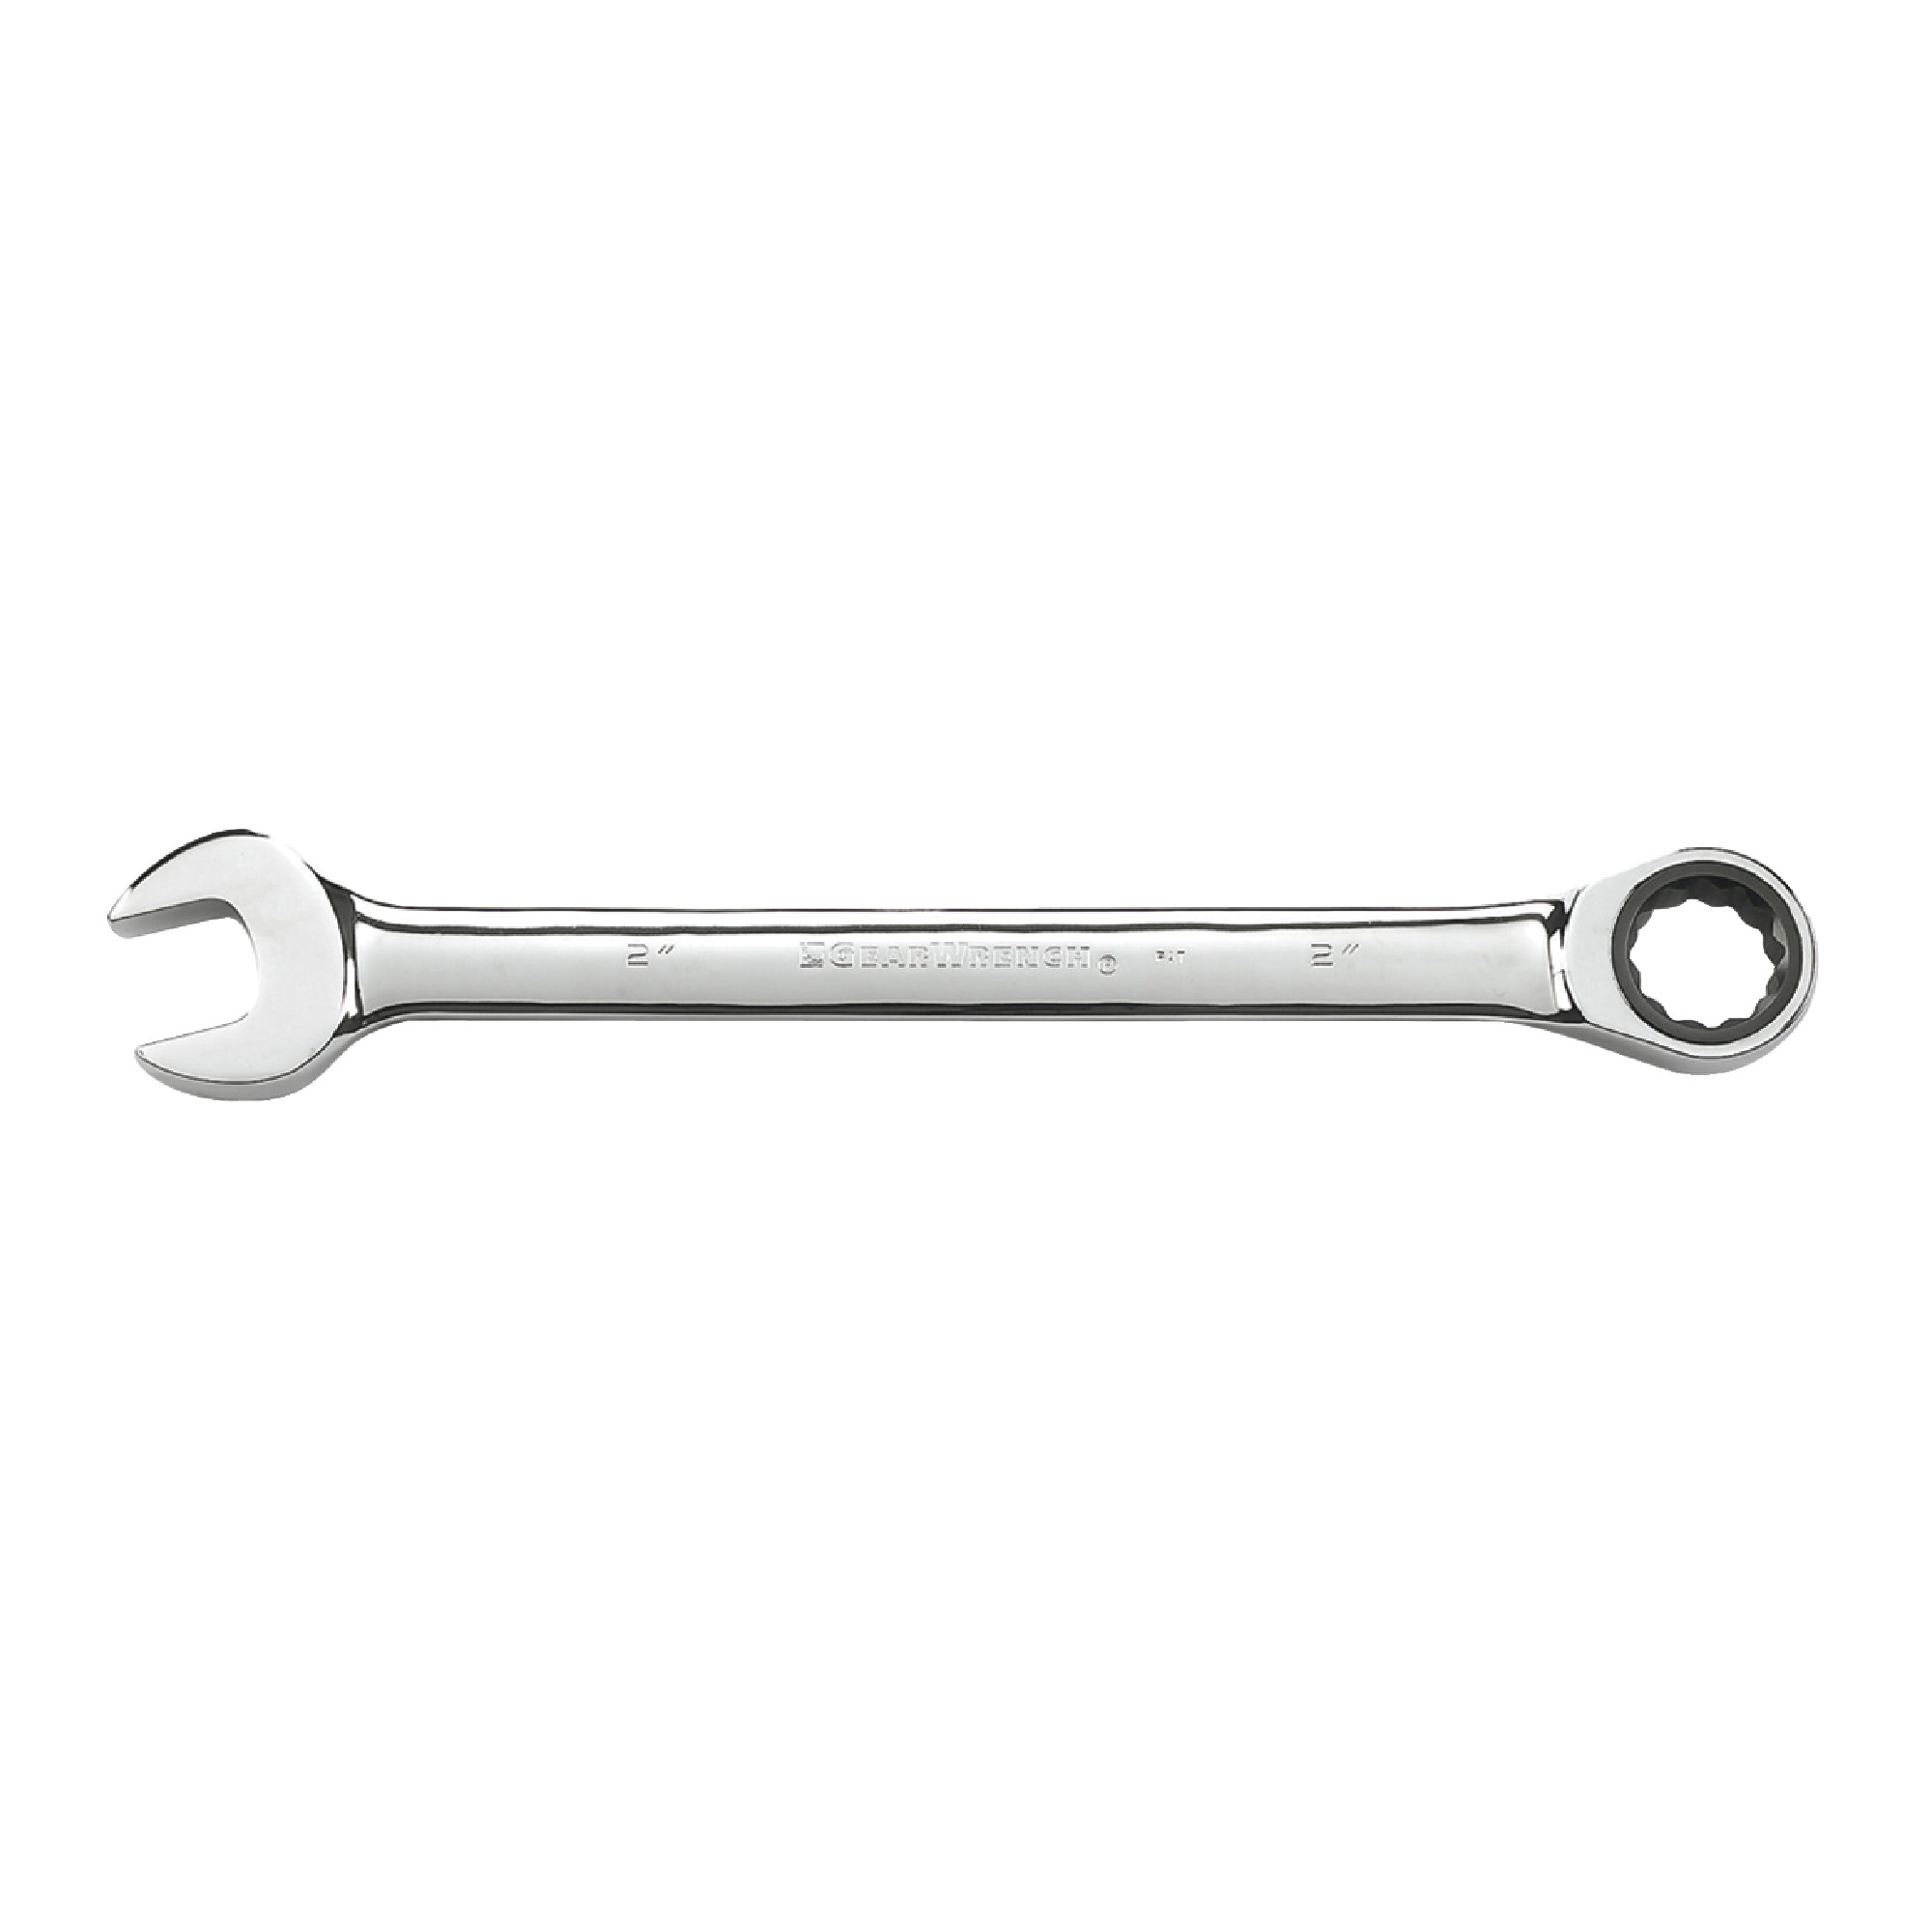 11/32" 12 Point Ratcheting Combination Wrench